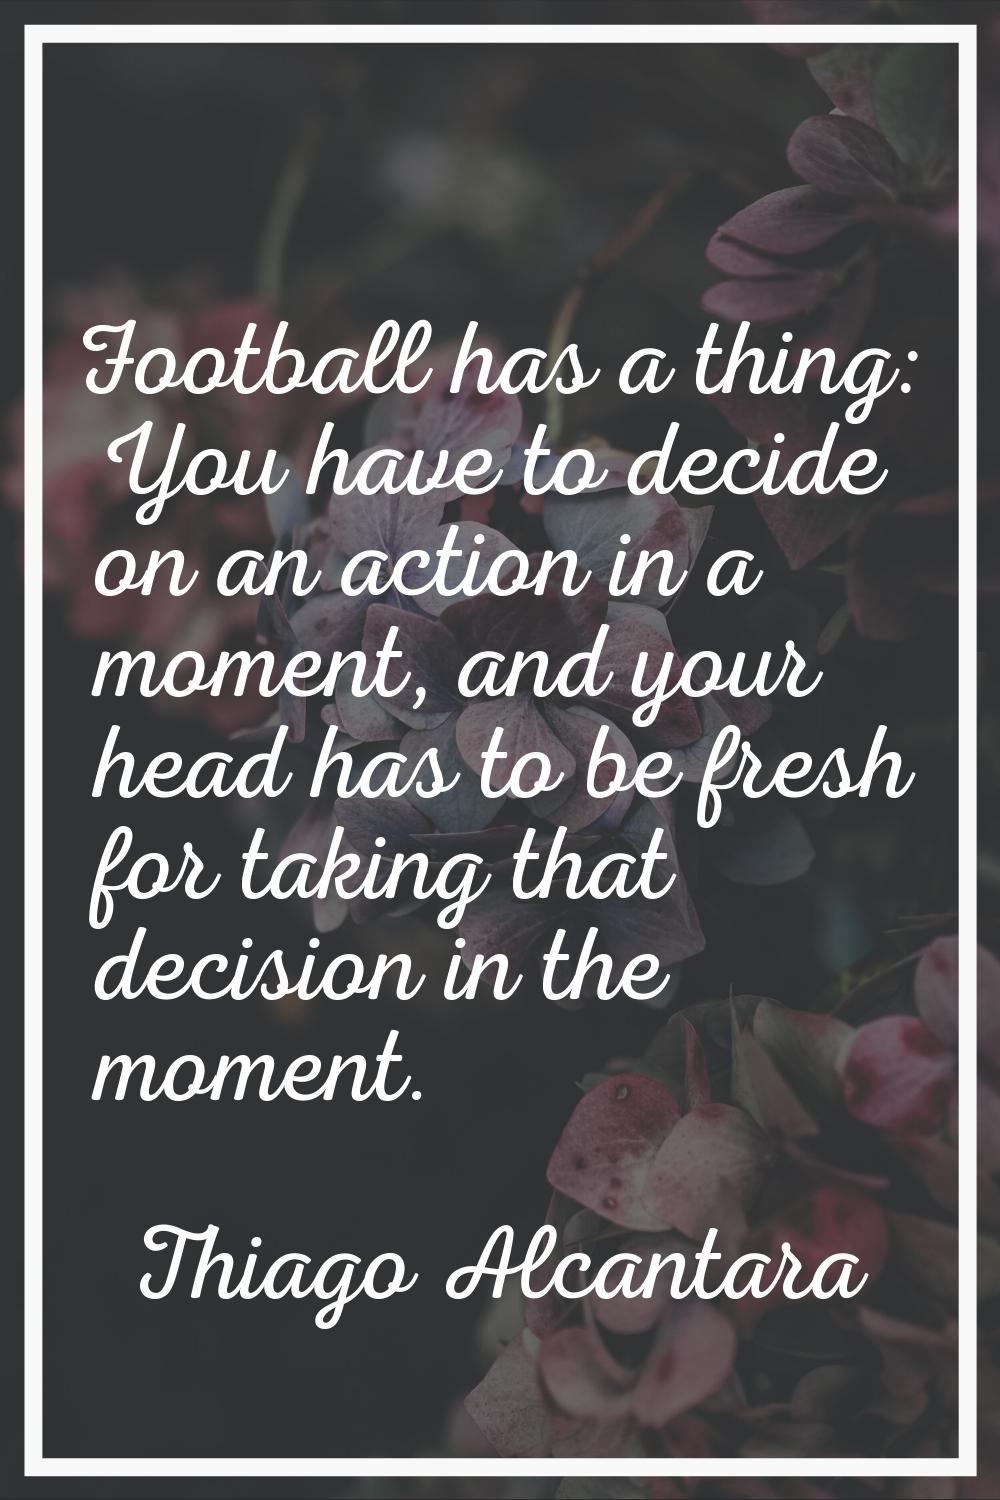 Football has a thing: You have to decide on an action in a moment, and your head has to be fresh fo